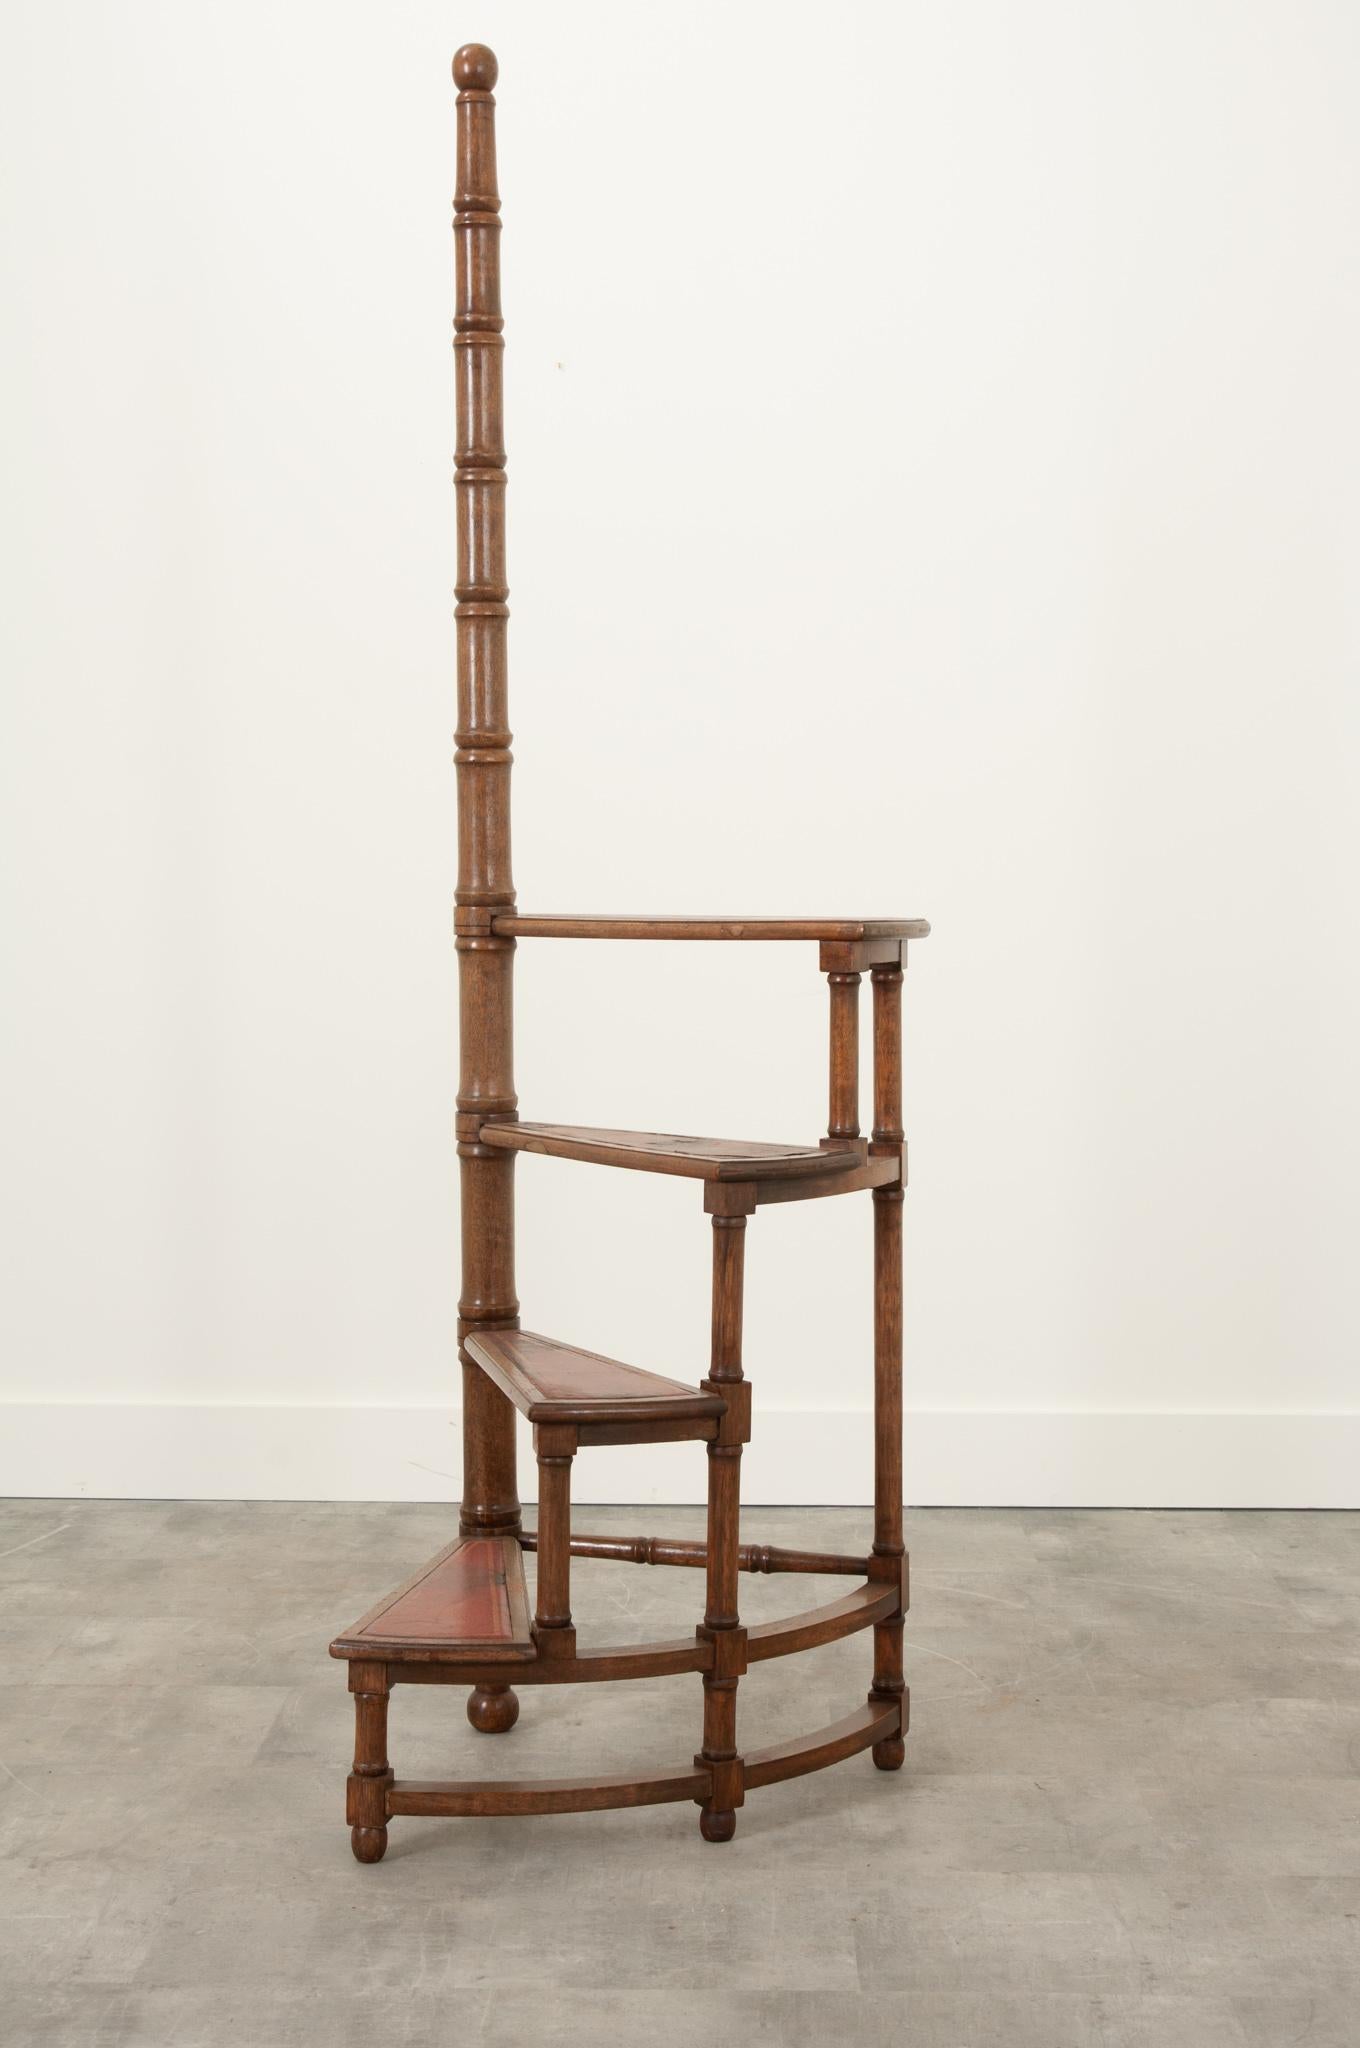 This French 19th century library step ladder is the perfect functional antique to elevate any space. The semi-circular ladder features four stairs rolled around a turned central post. The bright red toned leather with gold tooling inset into each